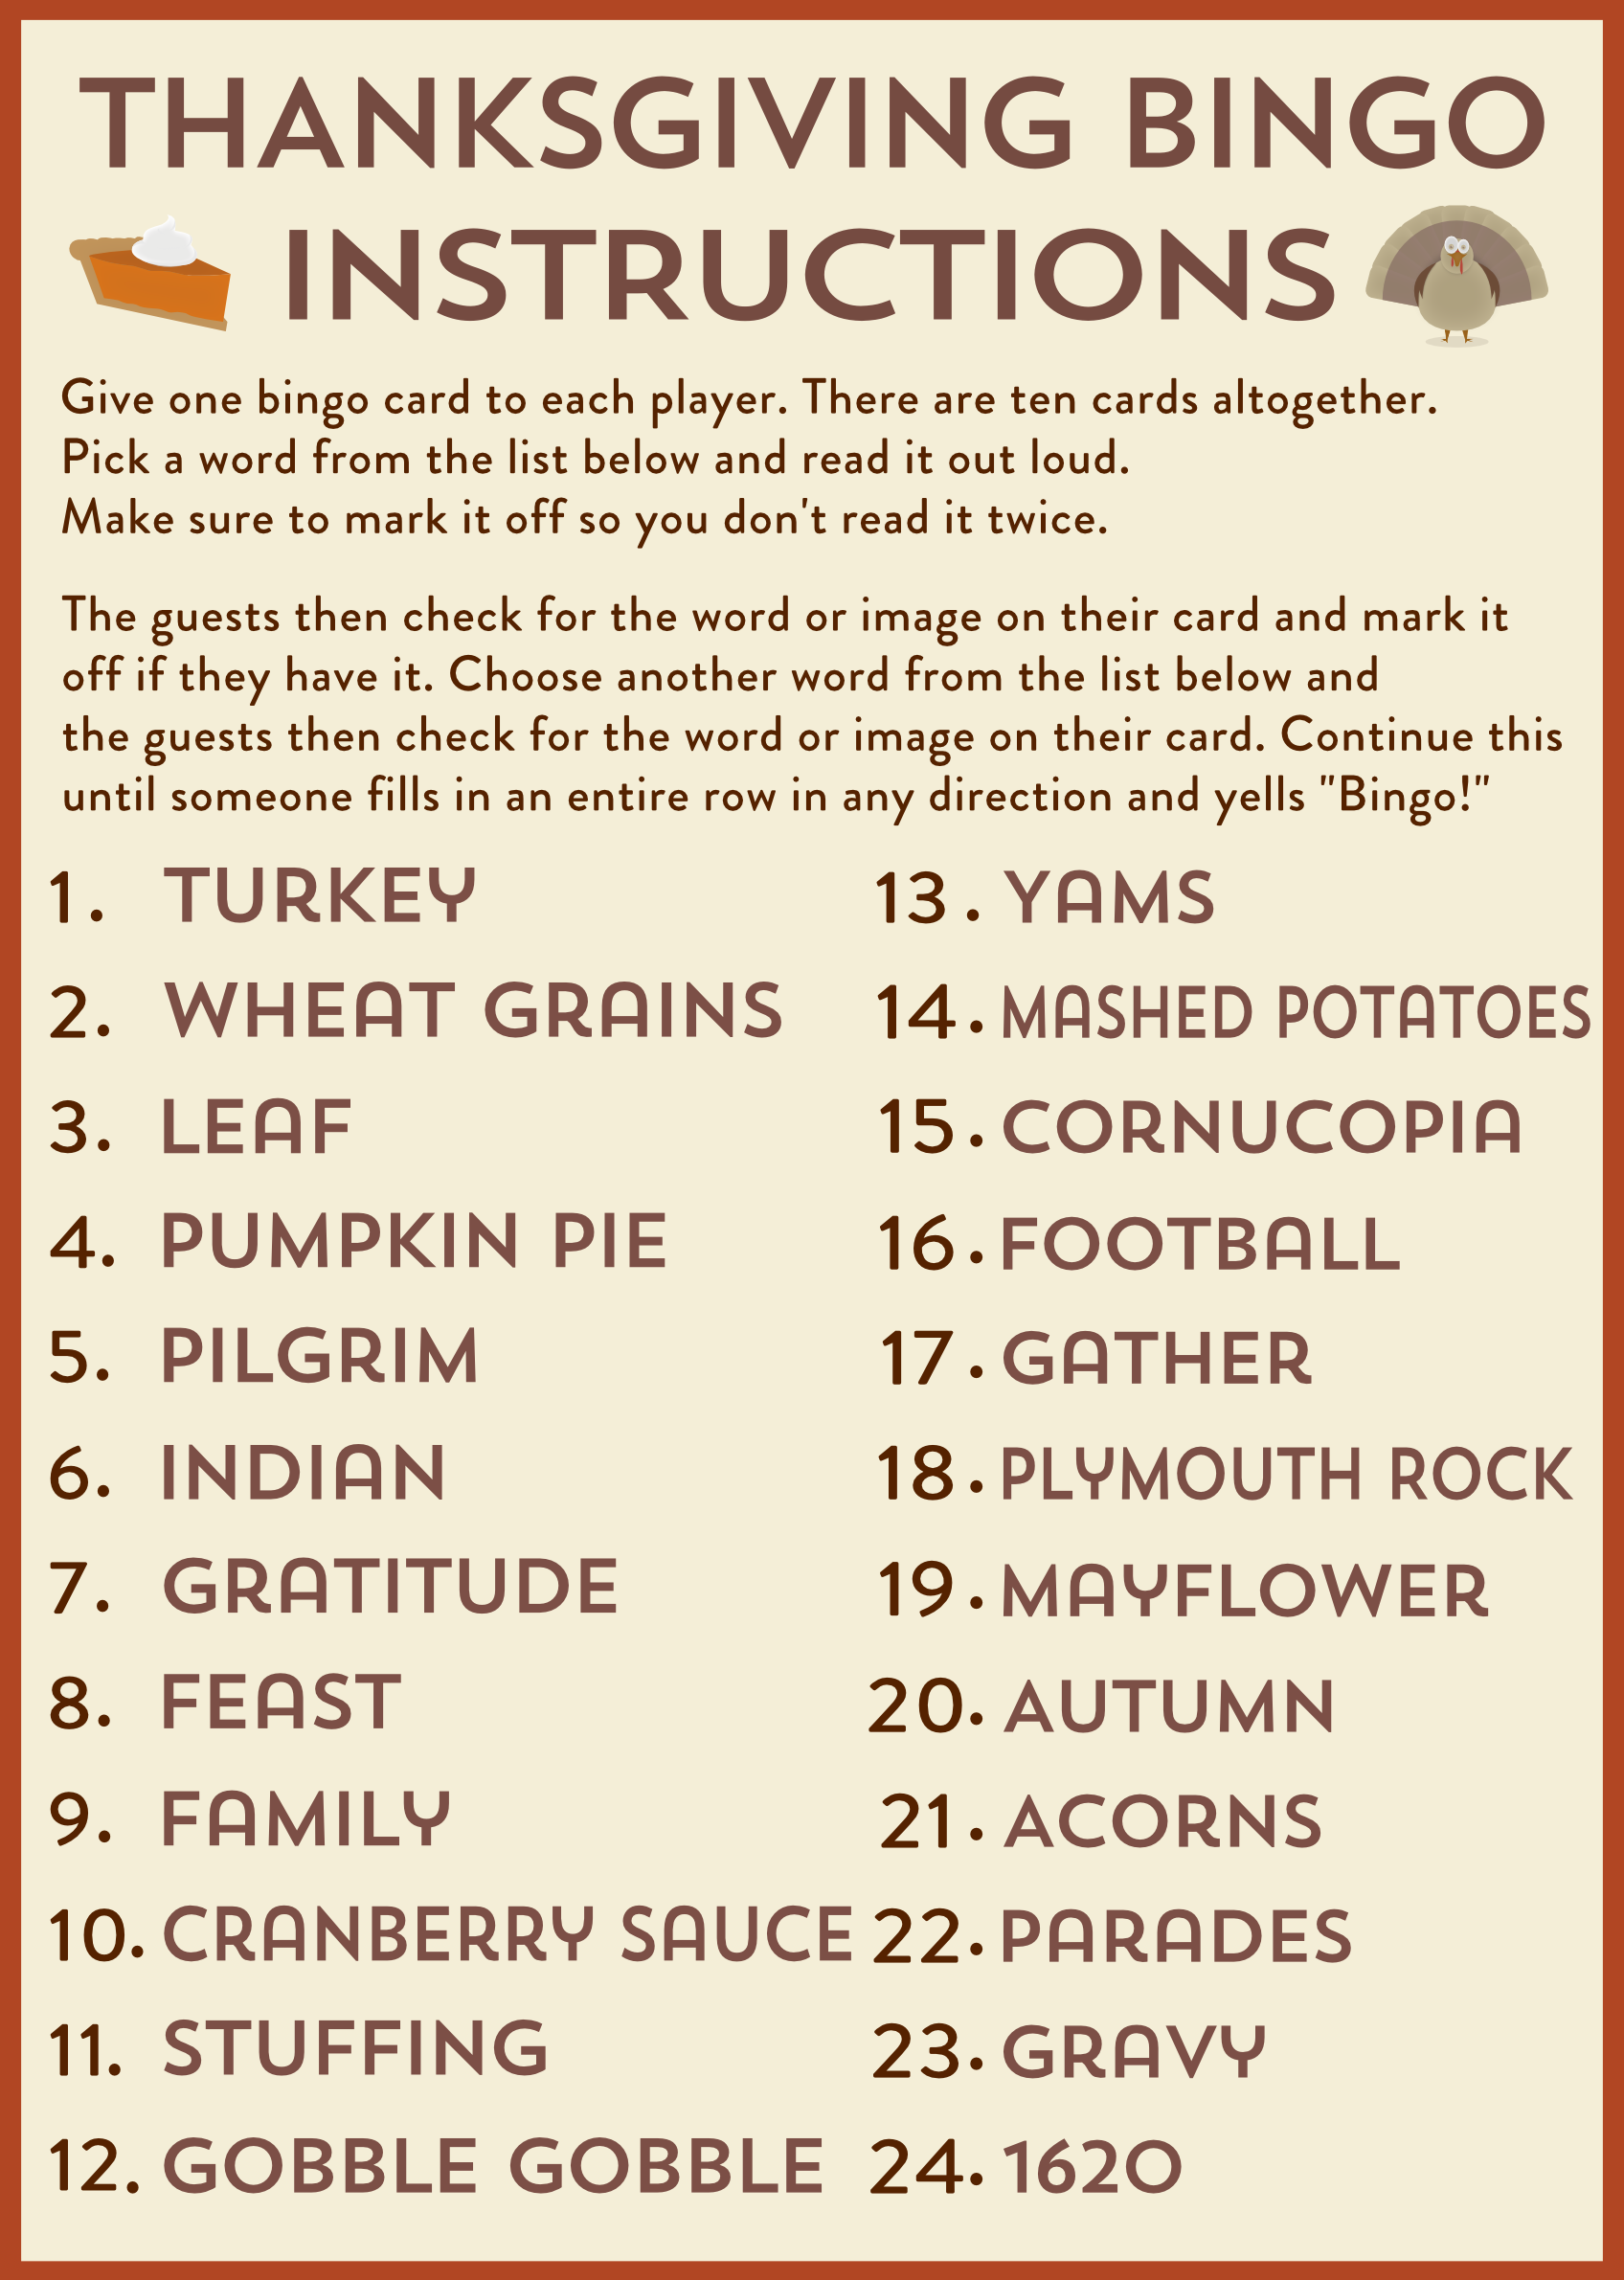 Free Printable Thanksgiving Bingo Cards | Catch My Party - Thanksgiving Bingo Cards Free Printable Thanksgiving Games For Adults